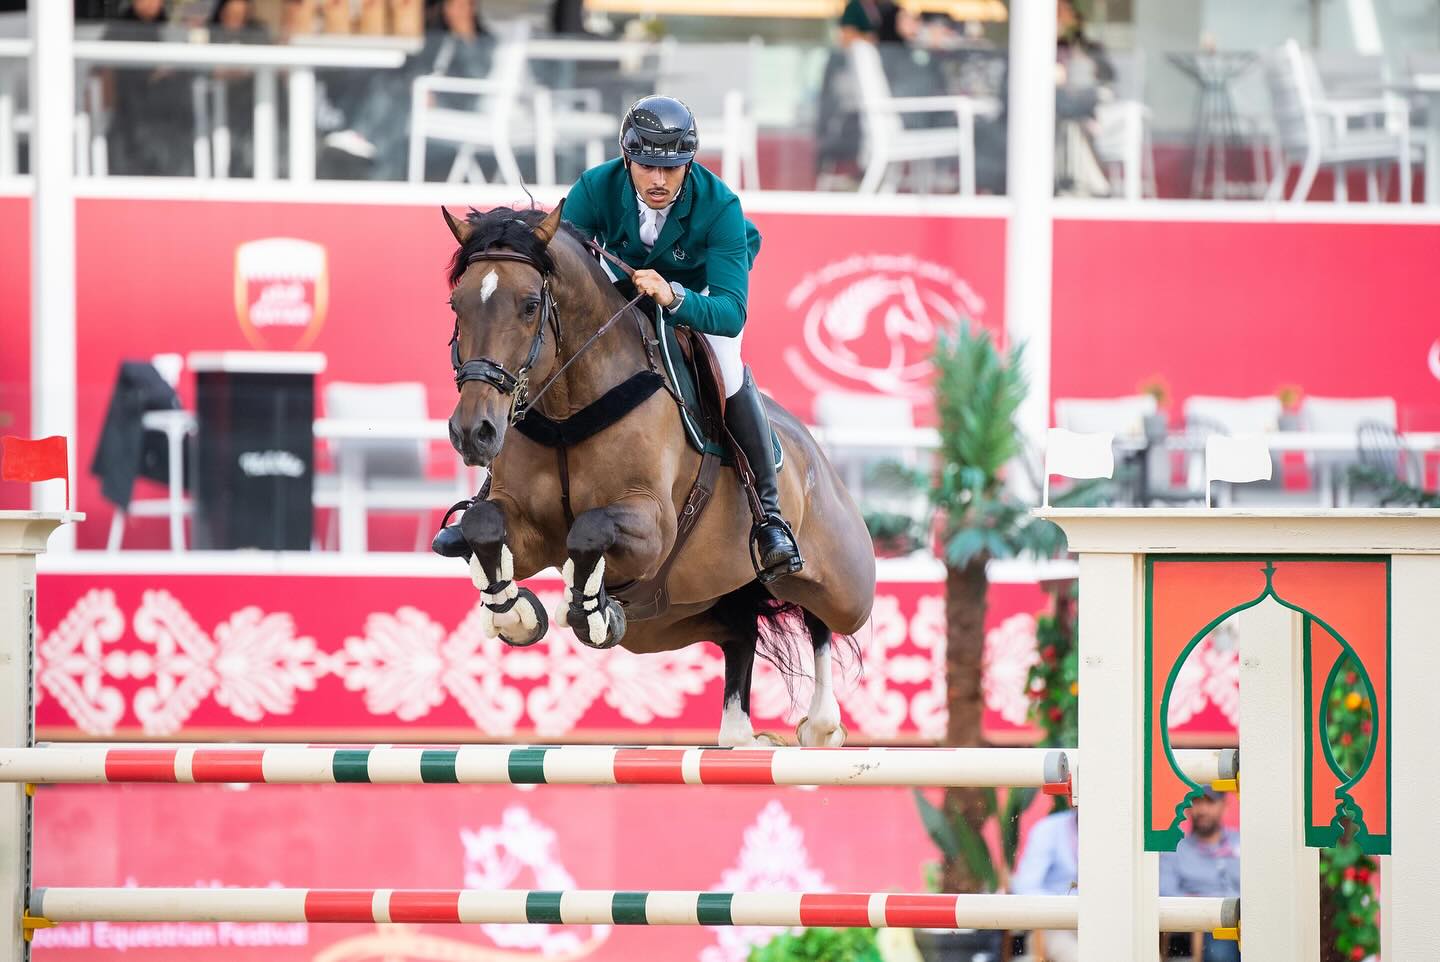 Abdulrahman Alrajhi and Ventago open the CSI5* competition in Doha with victory on Thursday